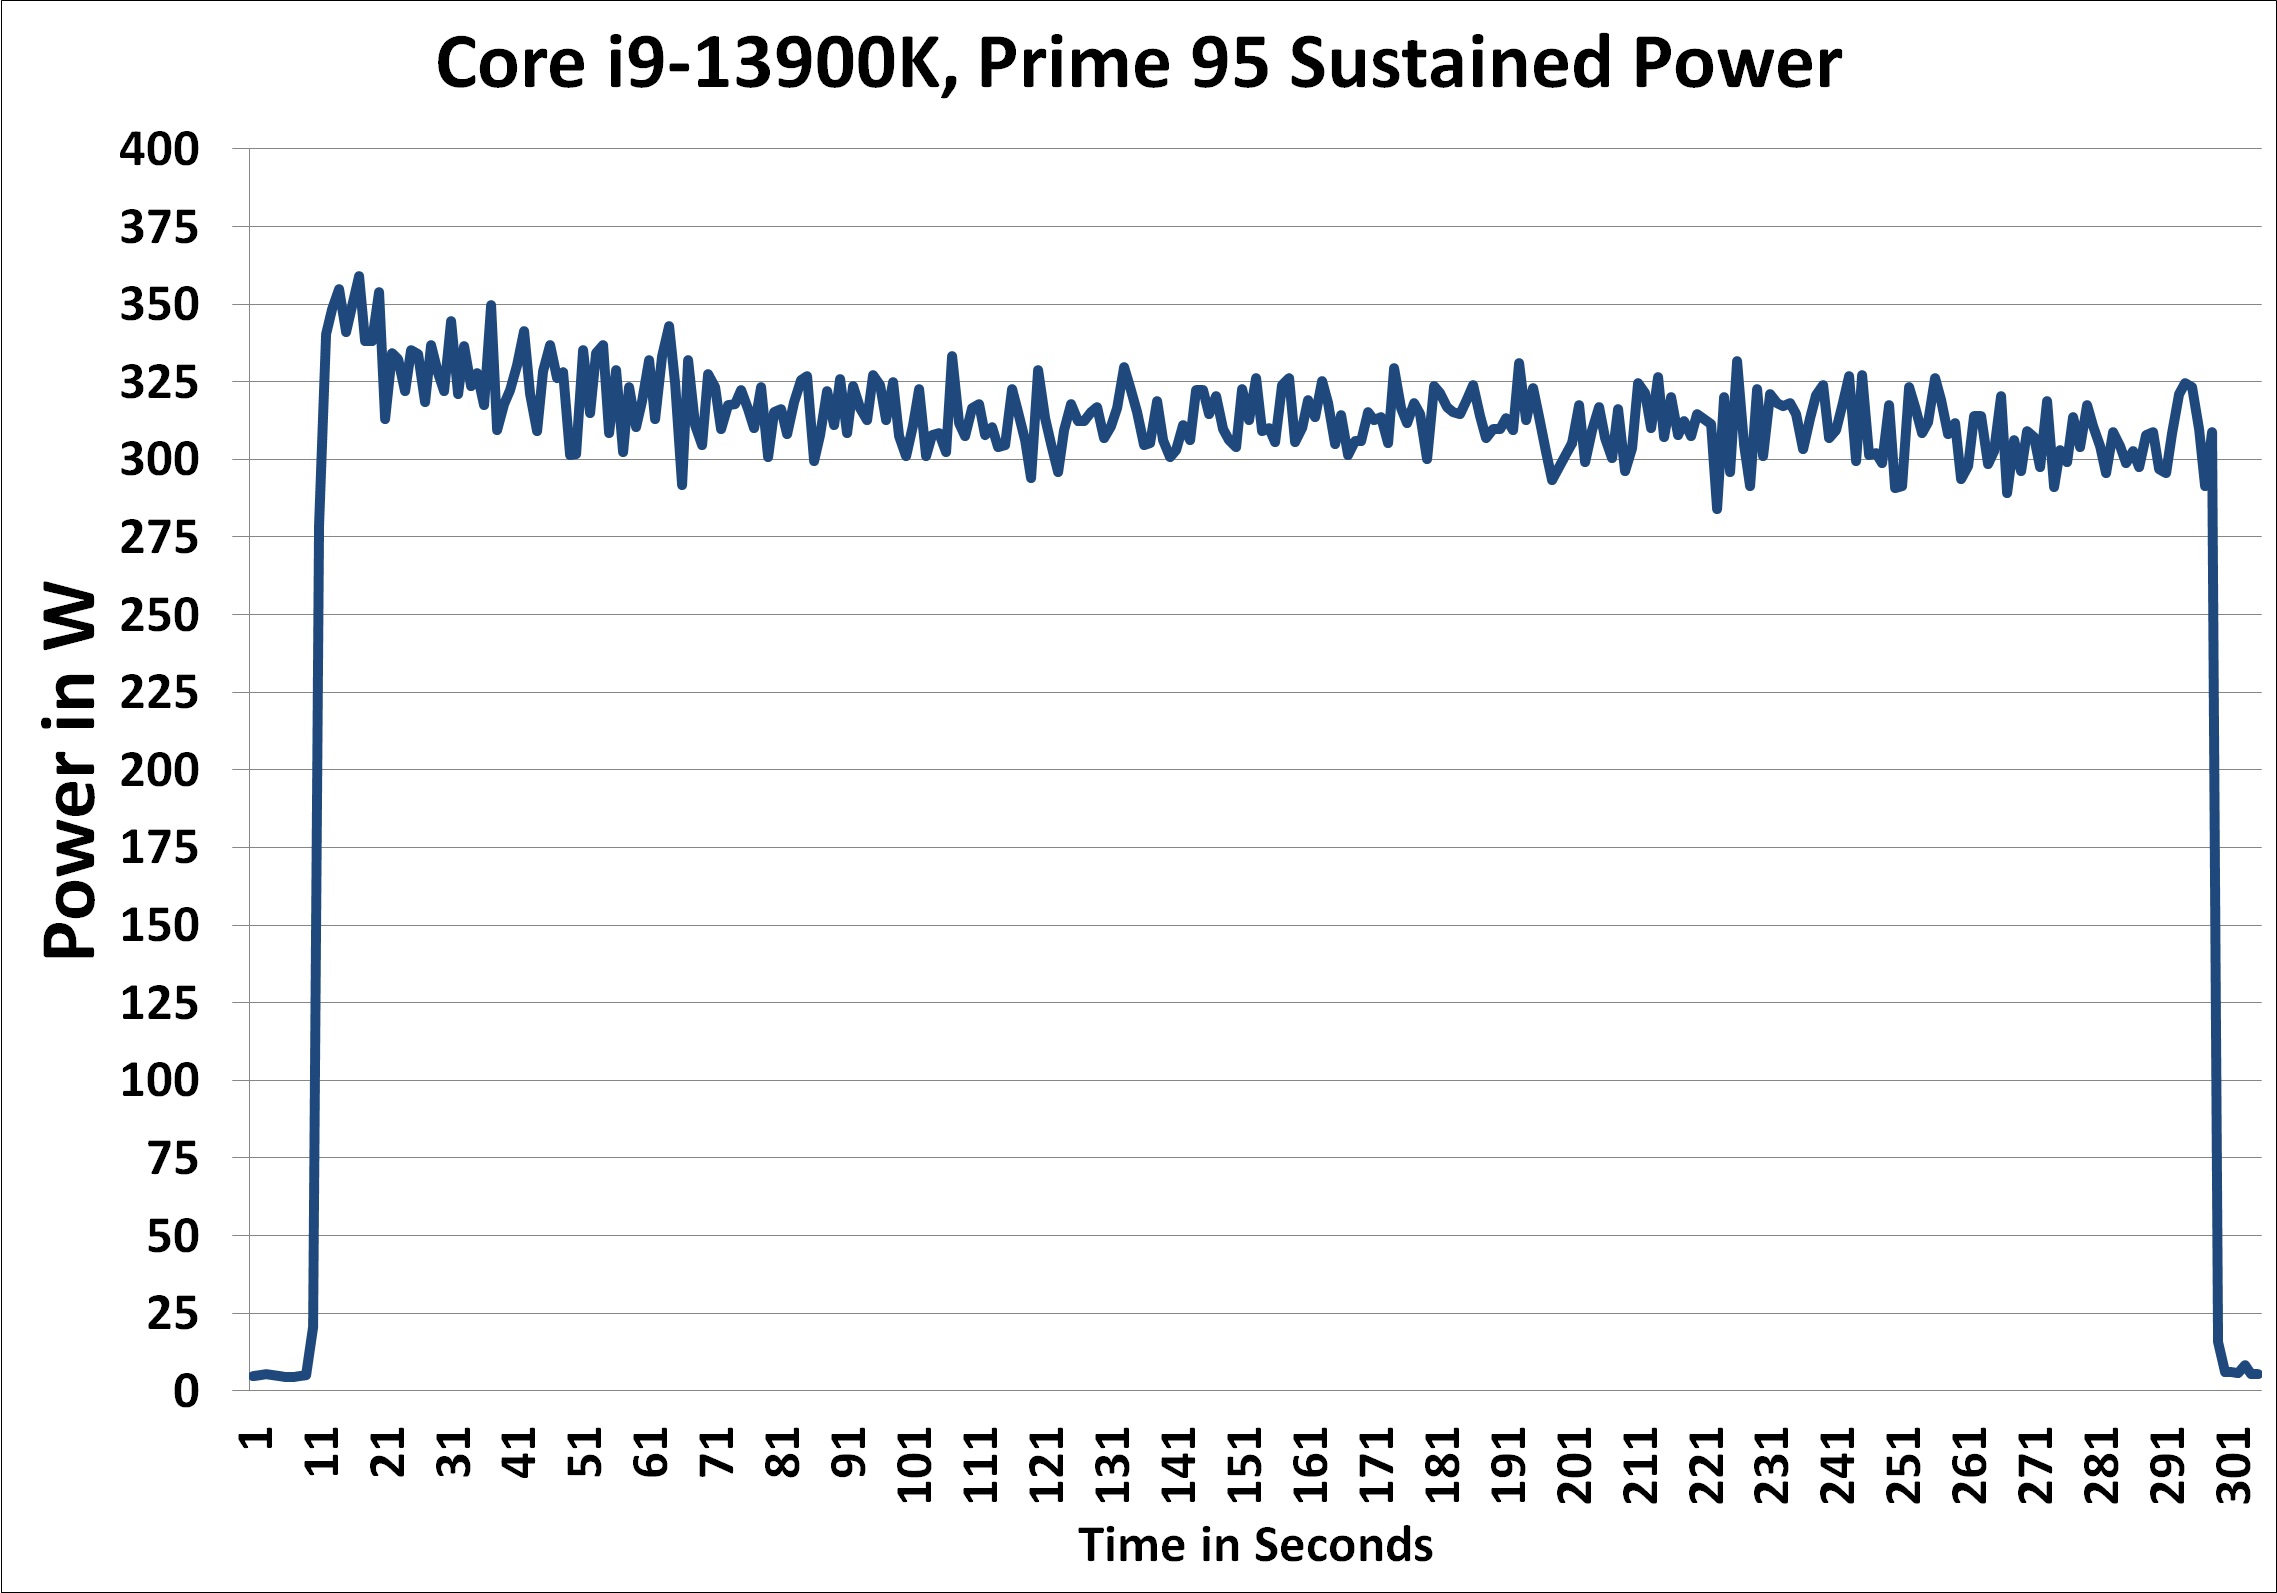 [IgorsLab] Intel Core i9-11900K - power consumption and hidden load peaks -  warning and all-clear for the PSU : r/hardware